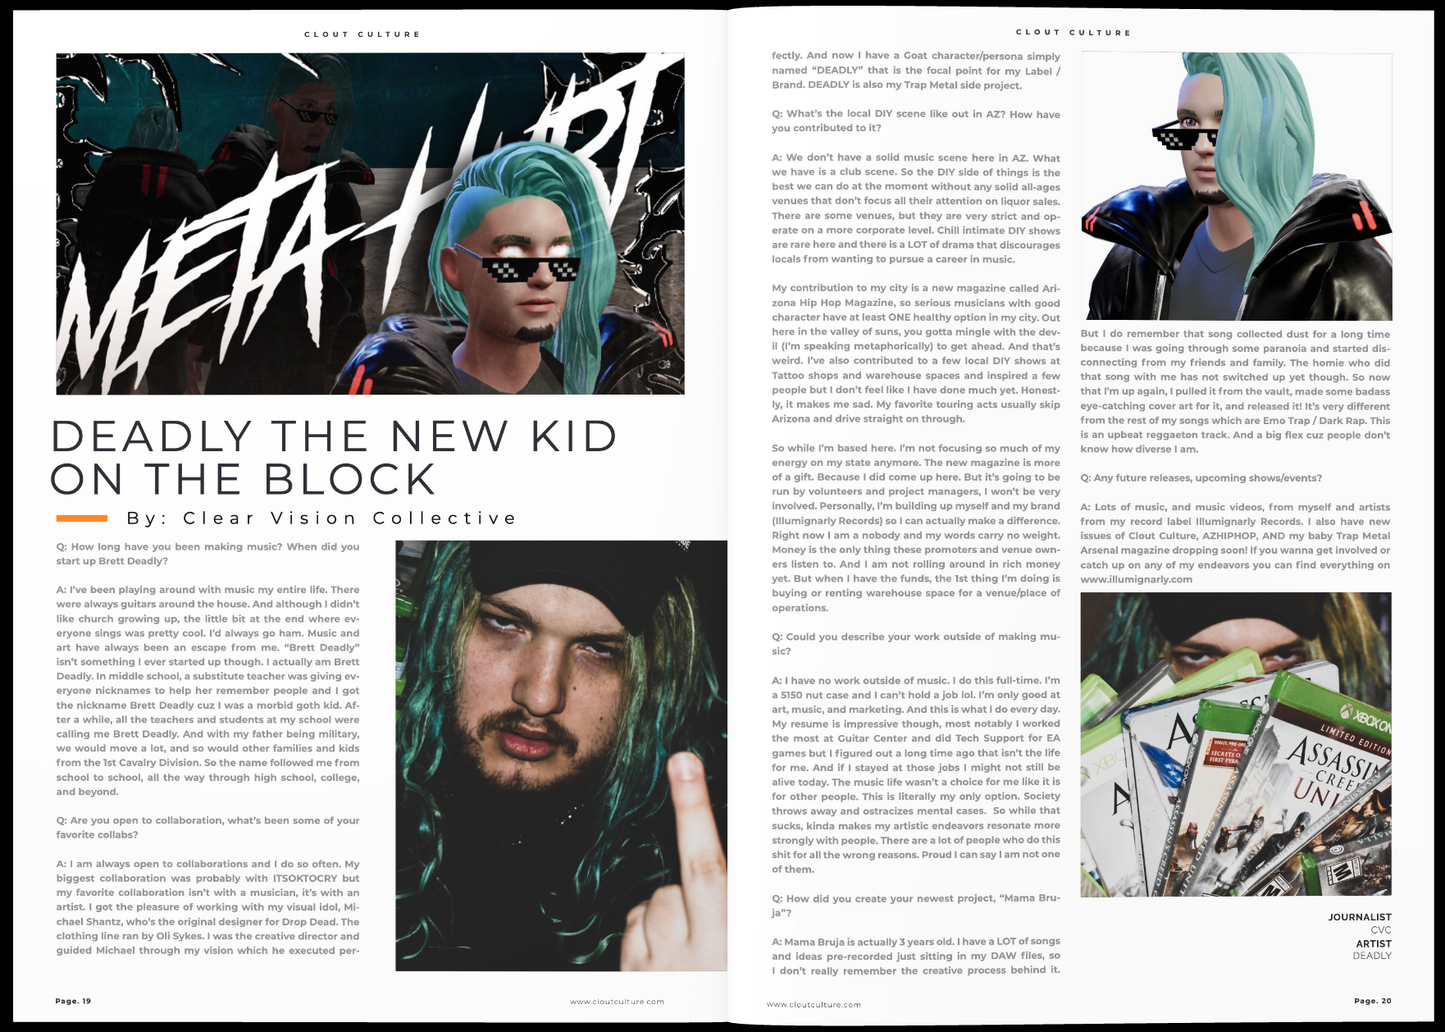 Clout Culture Magazine Issue #4 The 411 Show